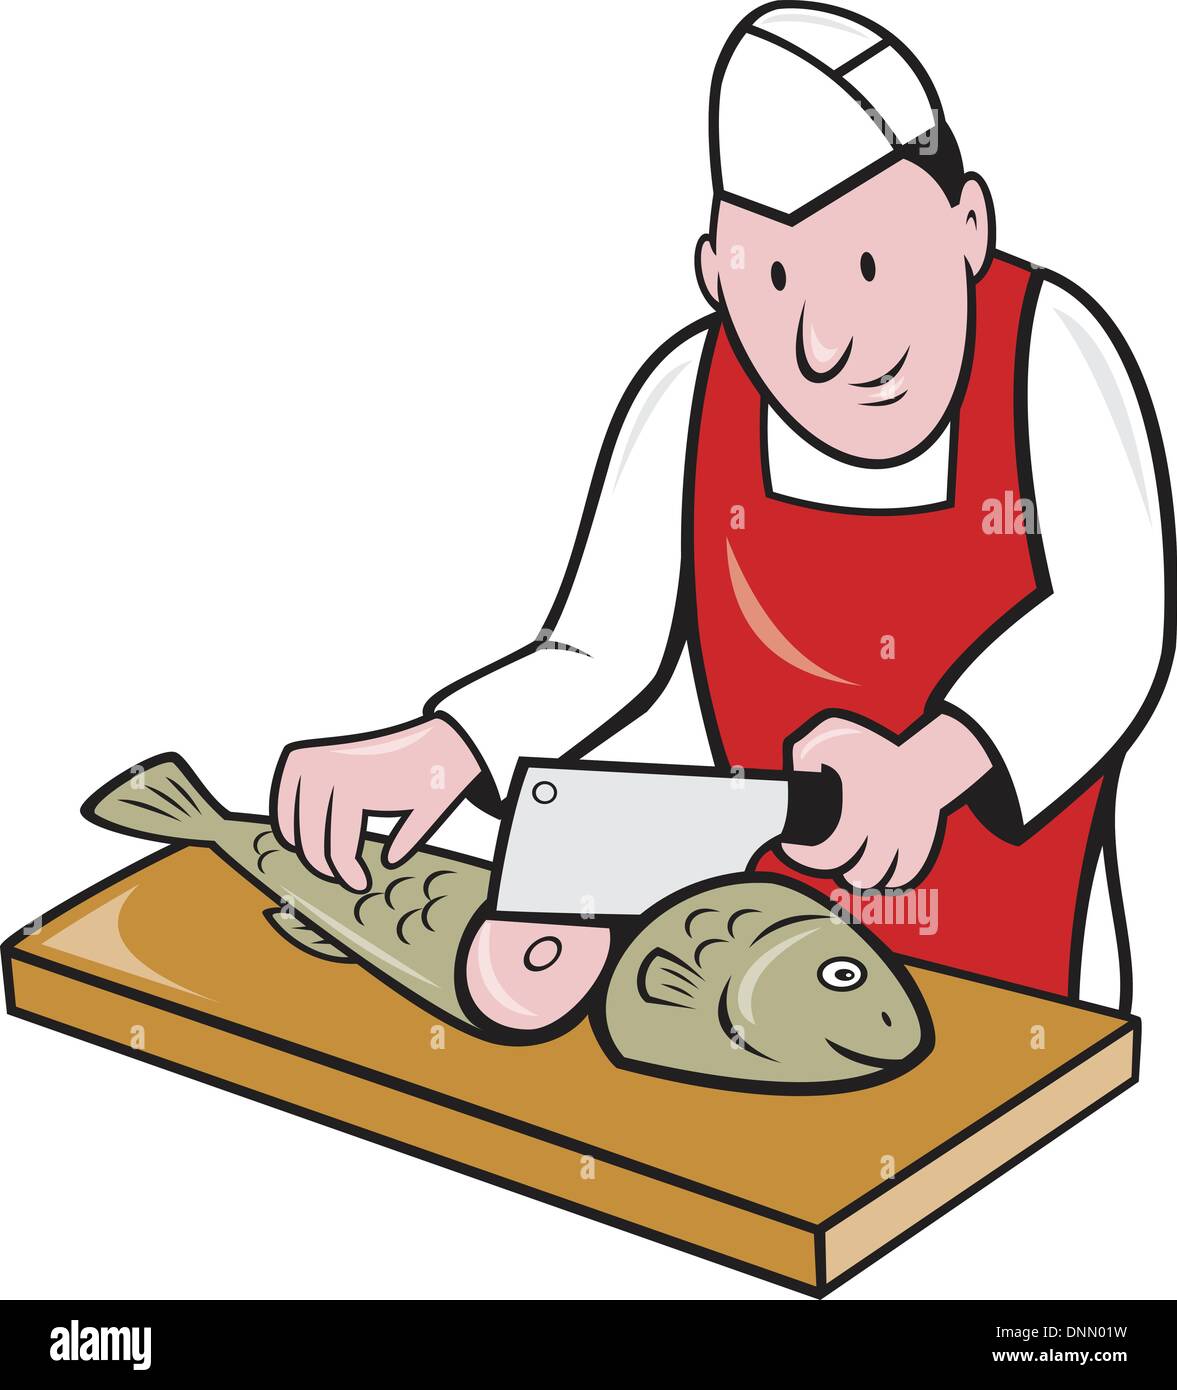 Retro style illustration of a butcher fishmonger sushi chef cutter worker with meat cleaver knife chopping fish facing front on Stock Vector